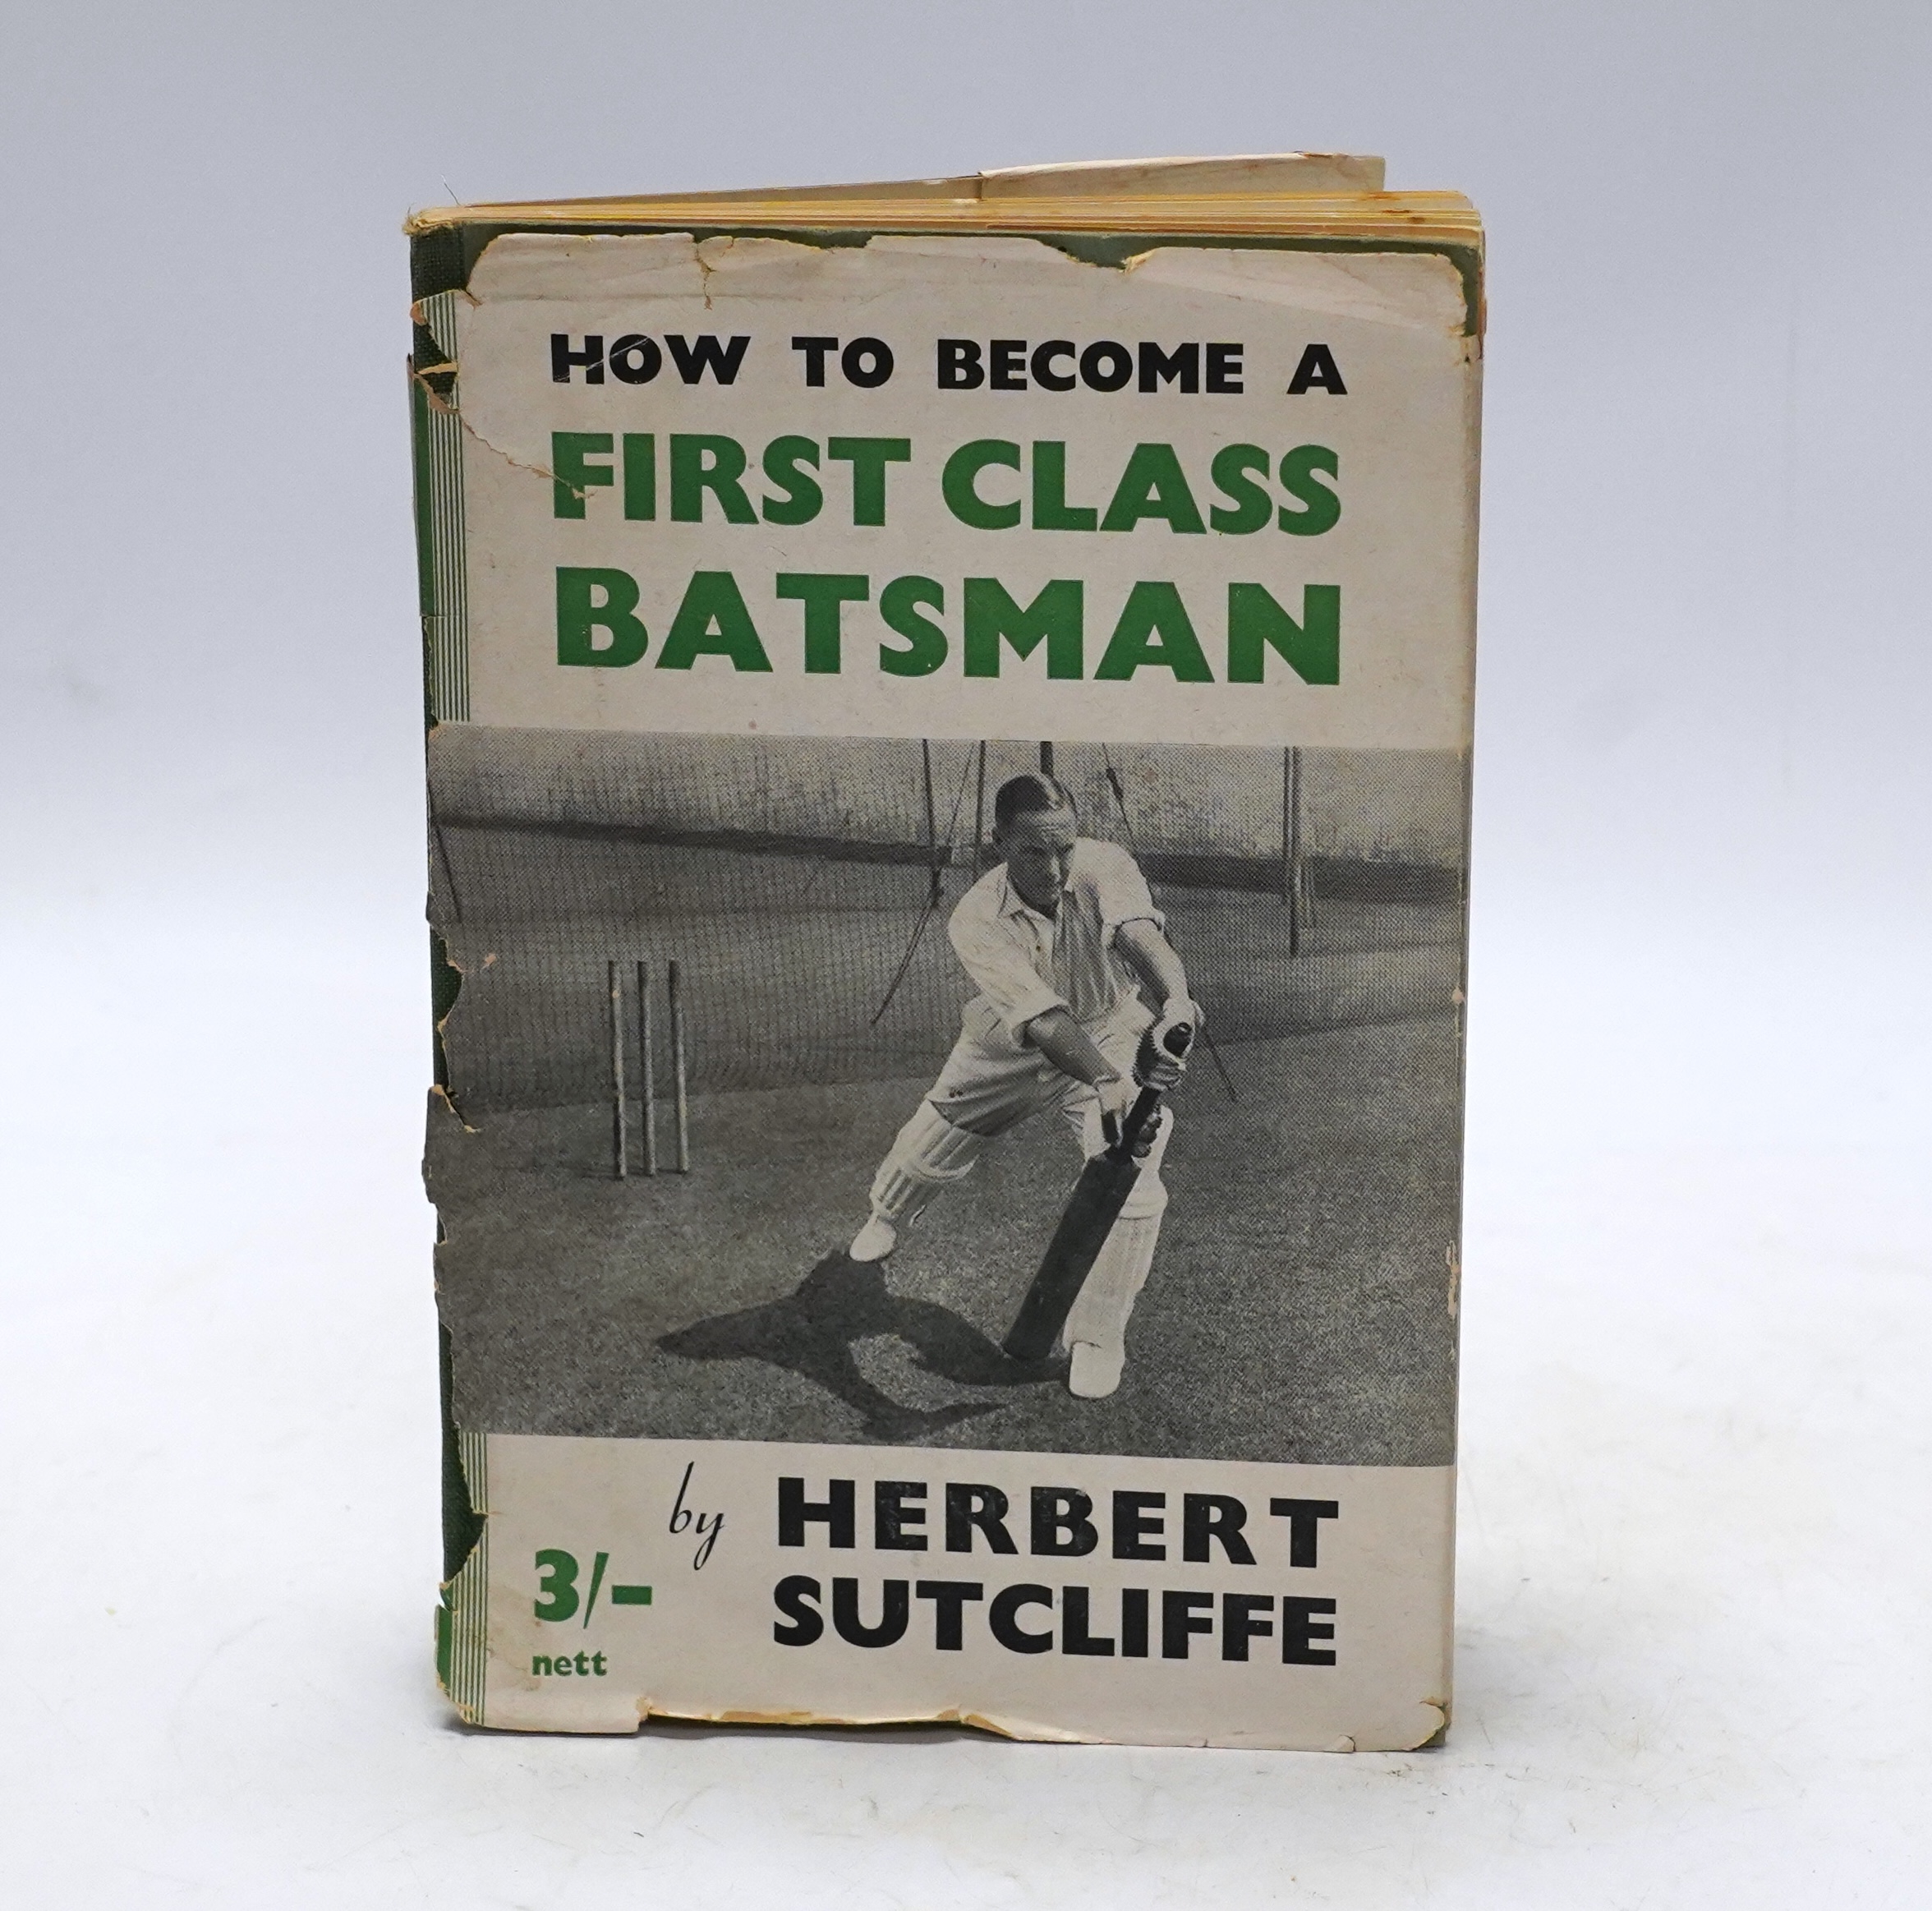 Cricket related interest; a signed copy of Herbert Sutcliffe; ‘How To Become A First Class Batsman’, hardback pub. Herbert Sutcliffe Ltd. with personal dedication to Howard Davies